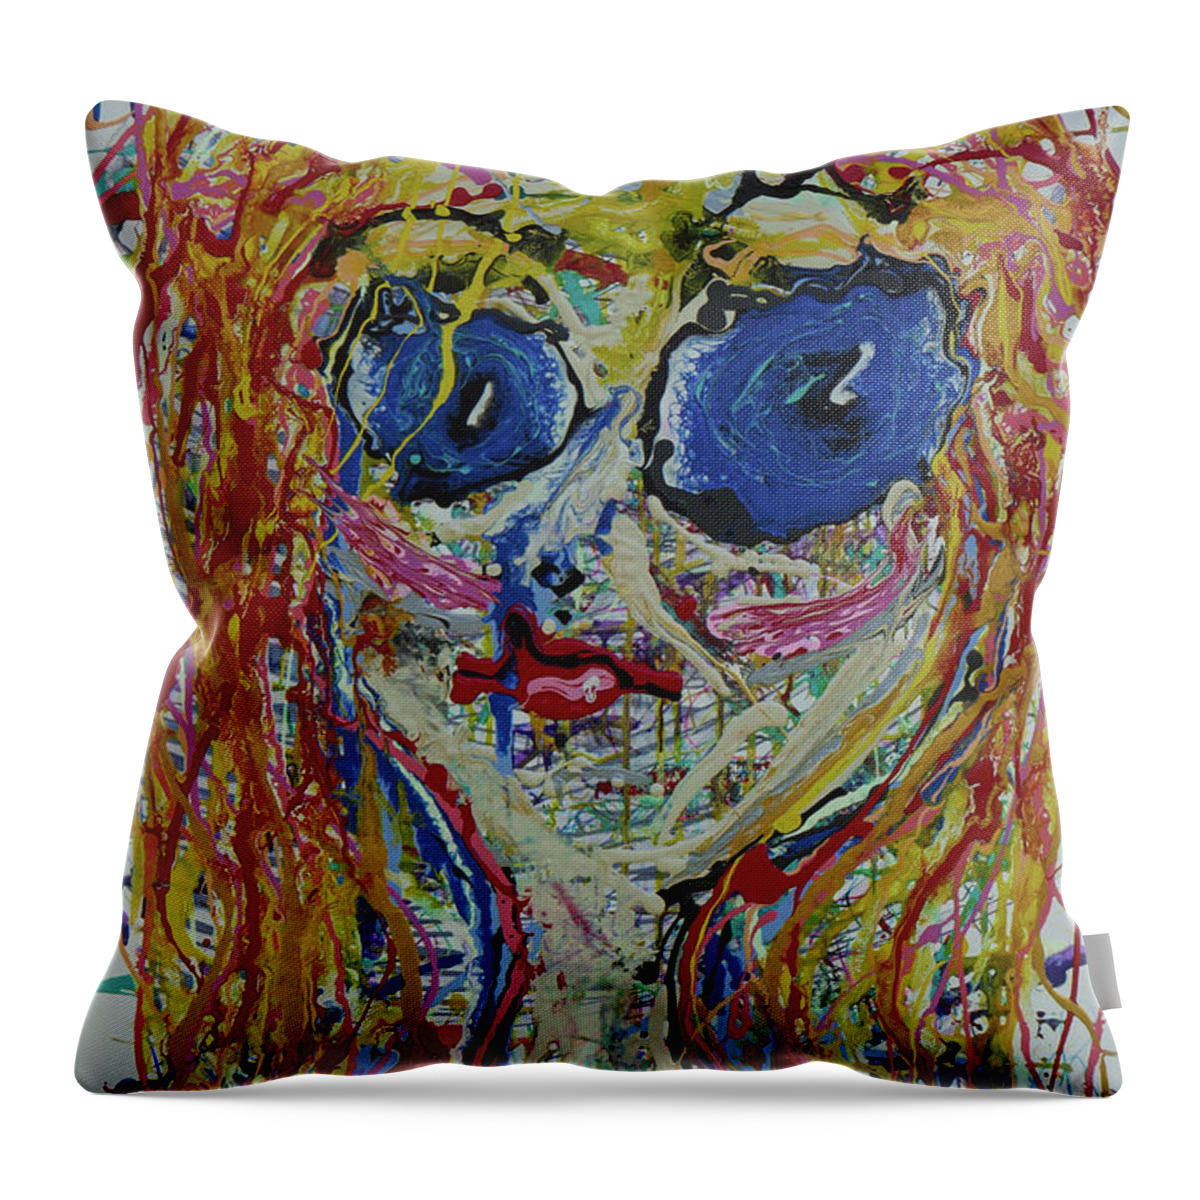 Ufnb Throw Pillow featuring the painting UFnB by Tessa Evette